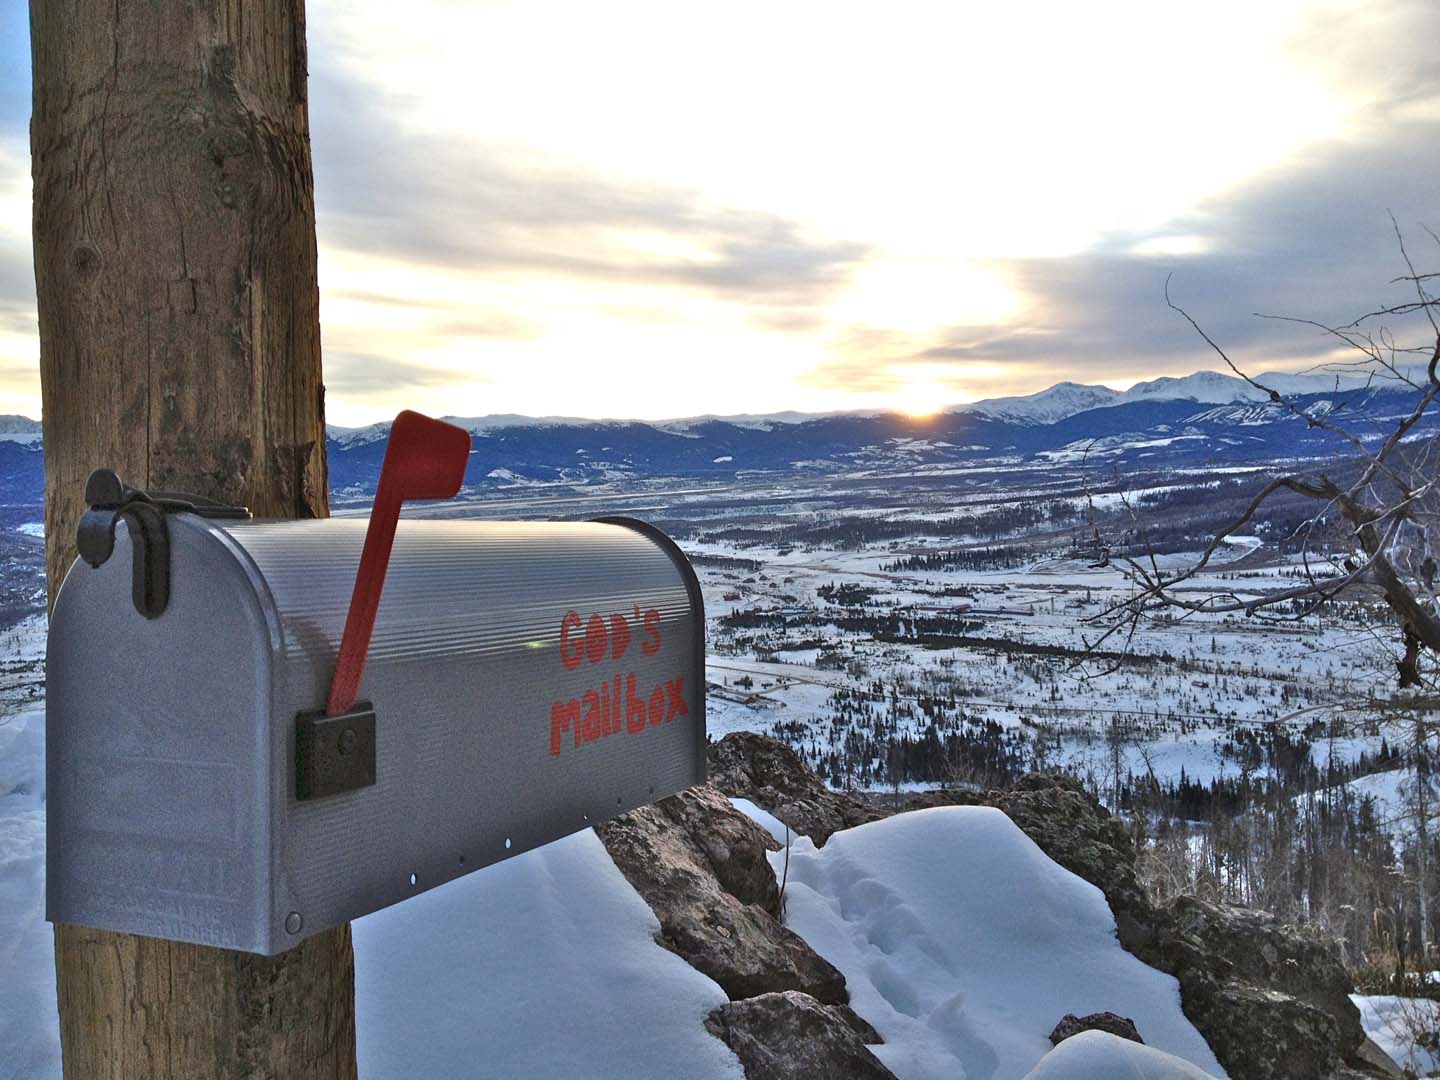 god's mail box on top of mountain